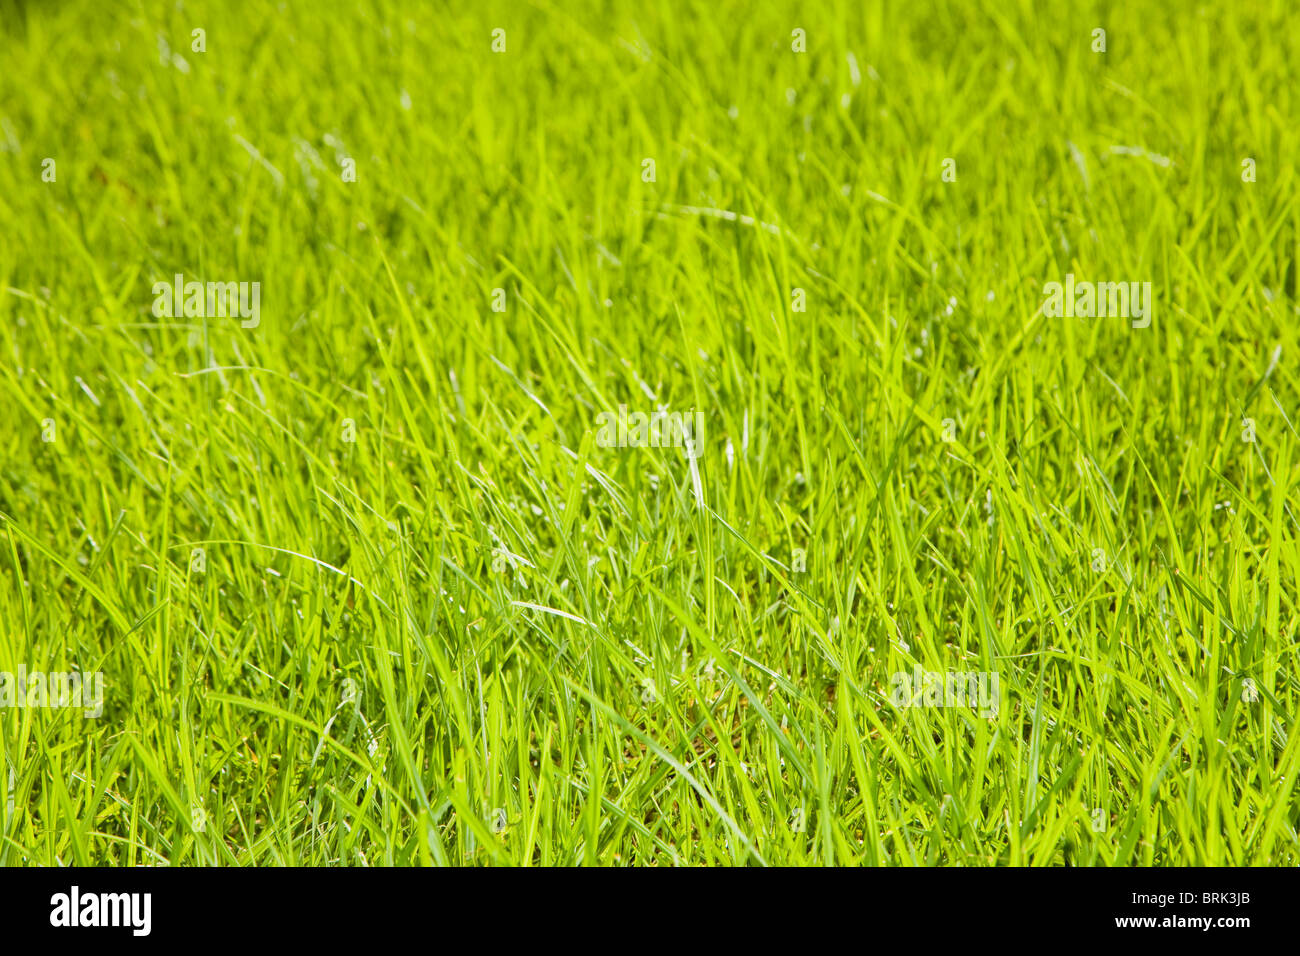 Green grass background with long blades of grass back lit by the sun Stock Photo